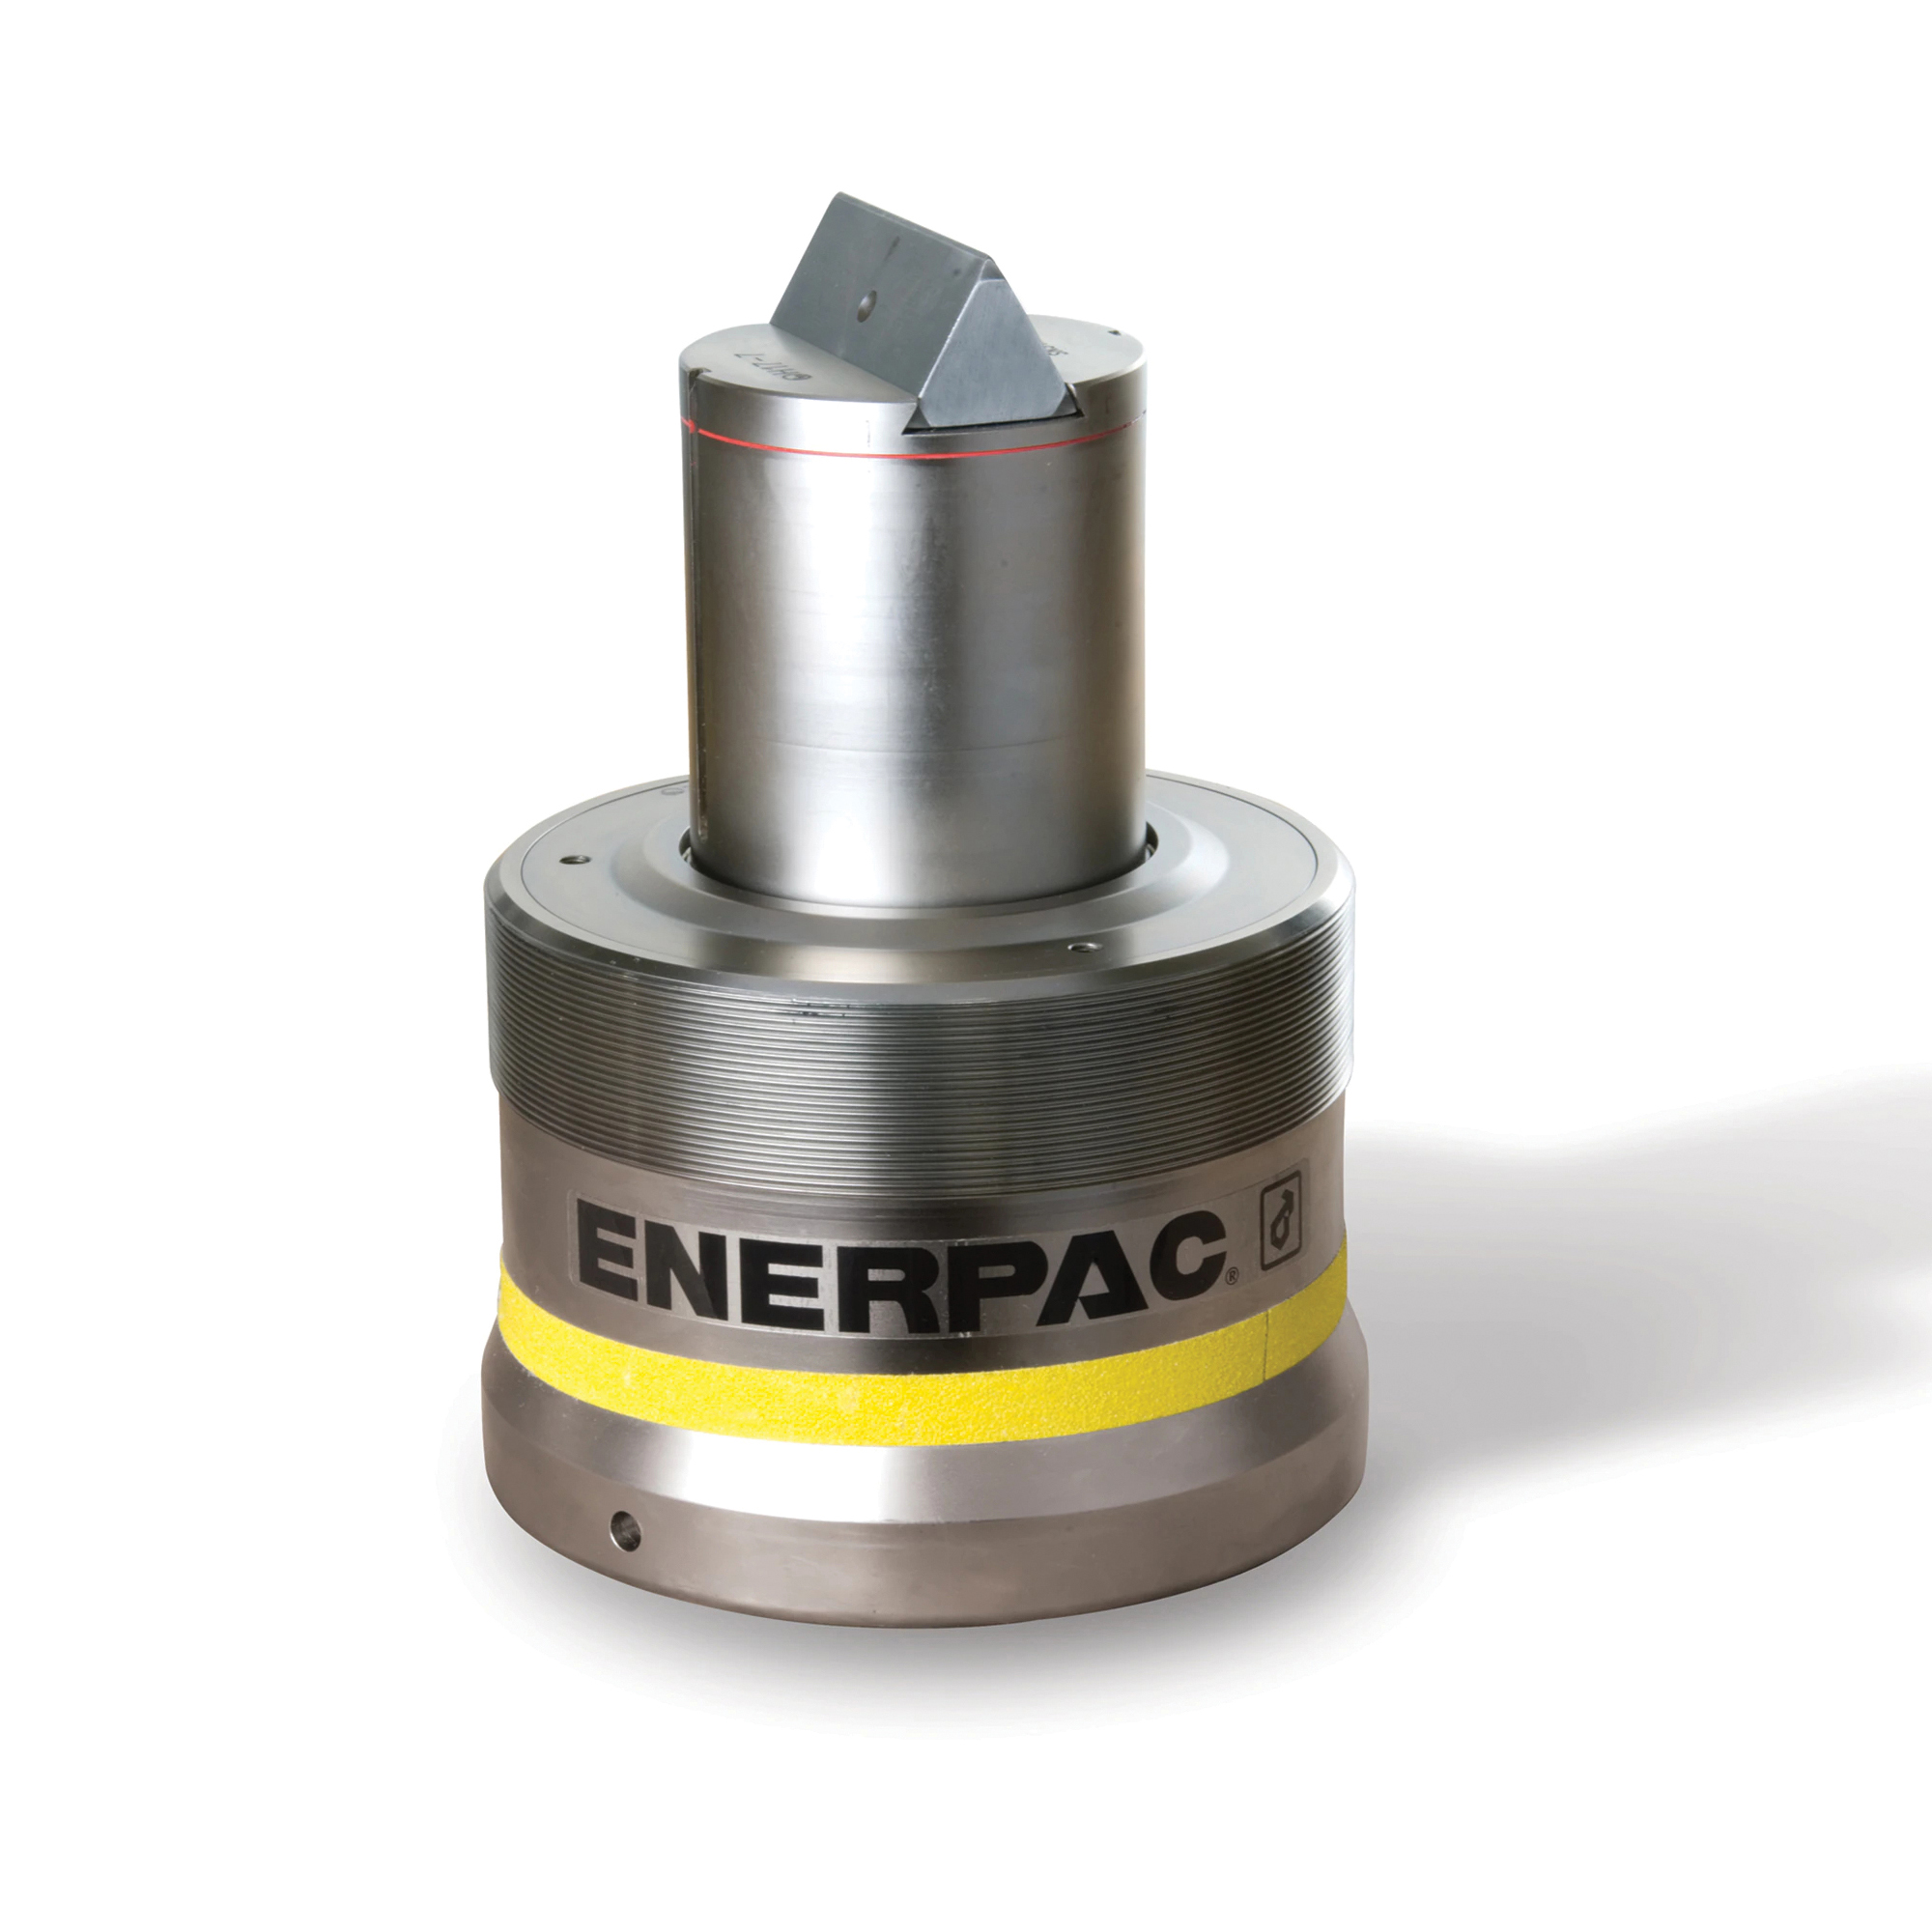 ENERPAC® NSC NSC70 Nut Splitter Cylinder, For Use With: NS7080, NS7085, NS7095, NS70105 Hydraulic Nut Splitters